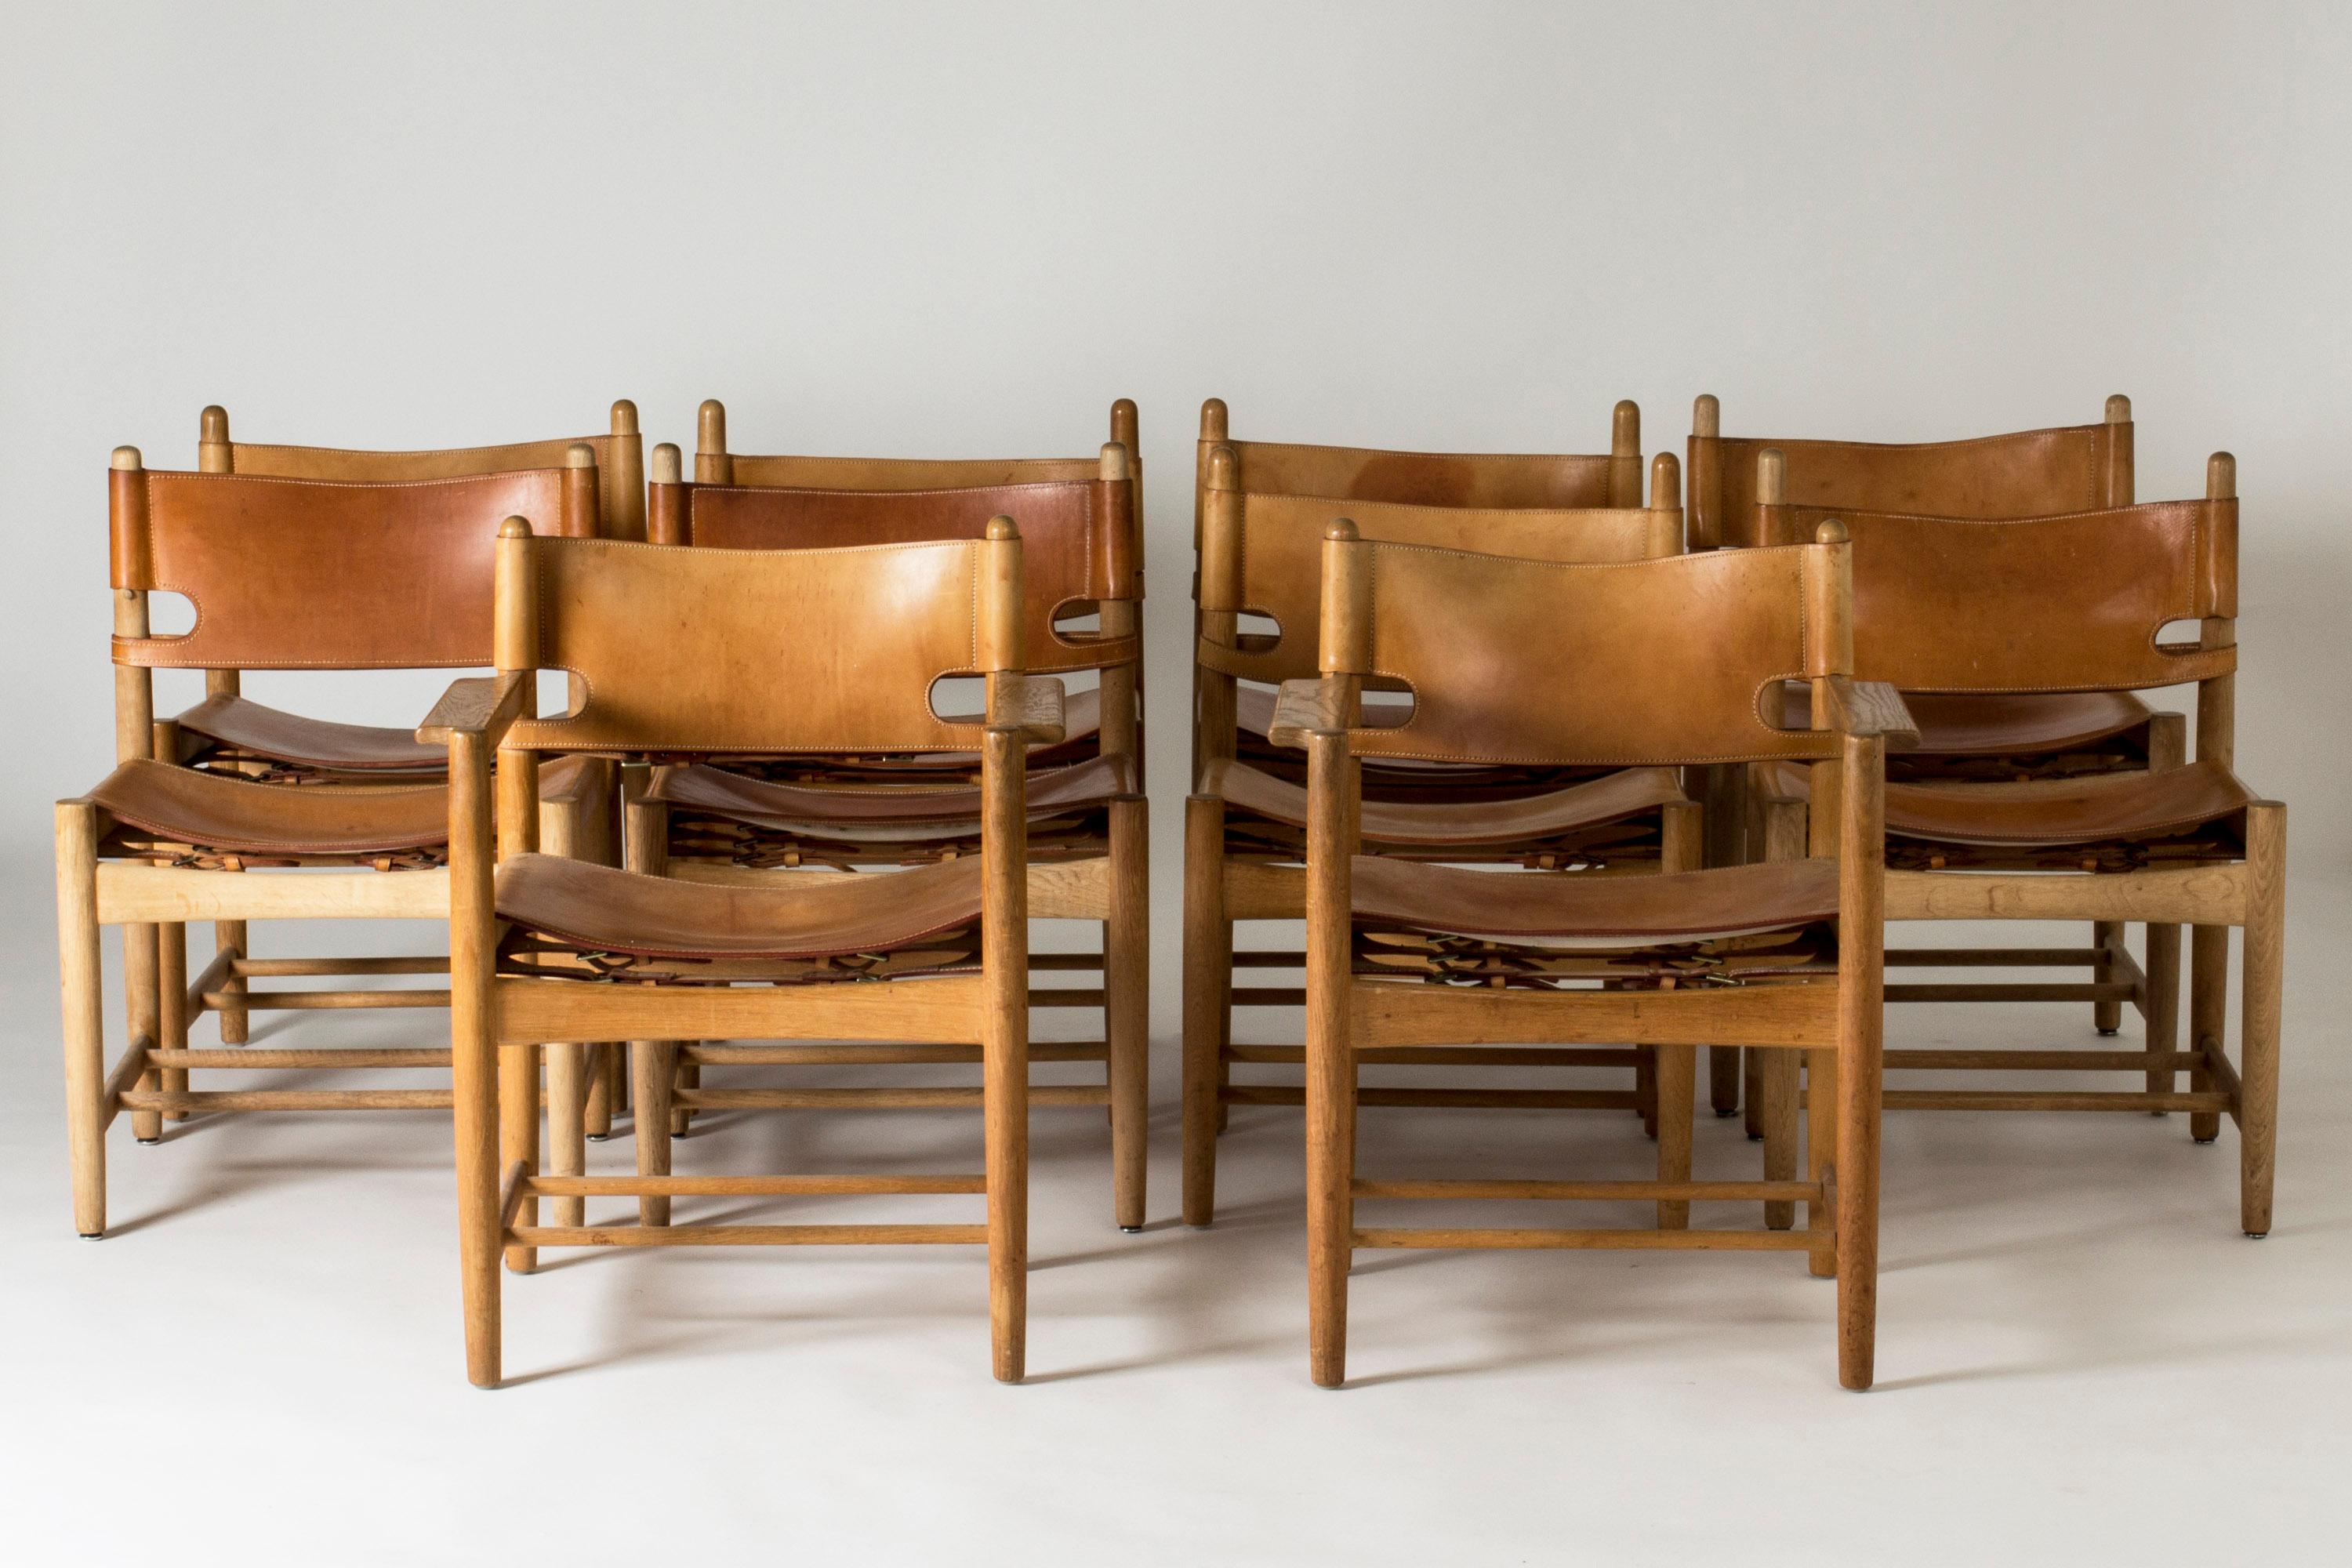 Set of ten dining chairs by Børge Mogensen, including a pair of 3238 armchairs and eight 3237 chairs. Made from oak and leather with accentuated white seams and buckles in the back. A great design, comfortable to be seated in.